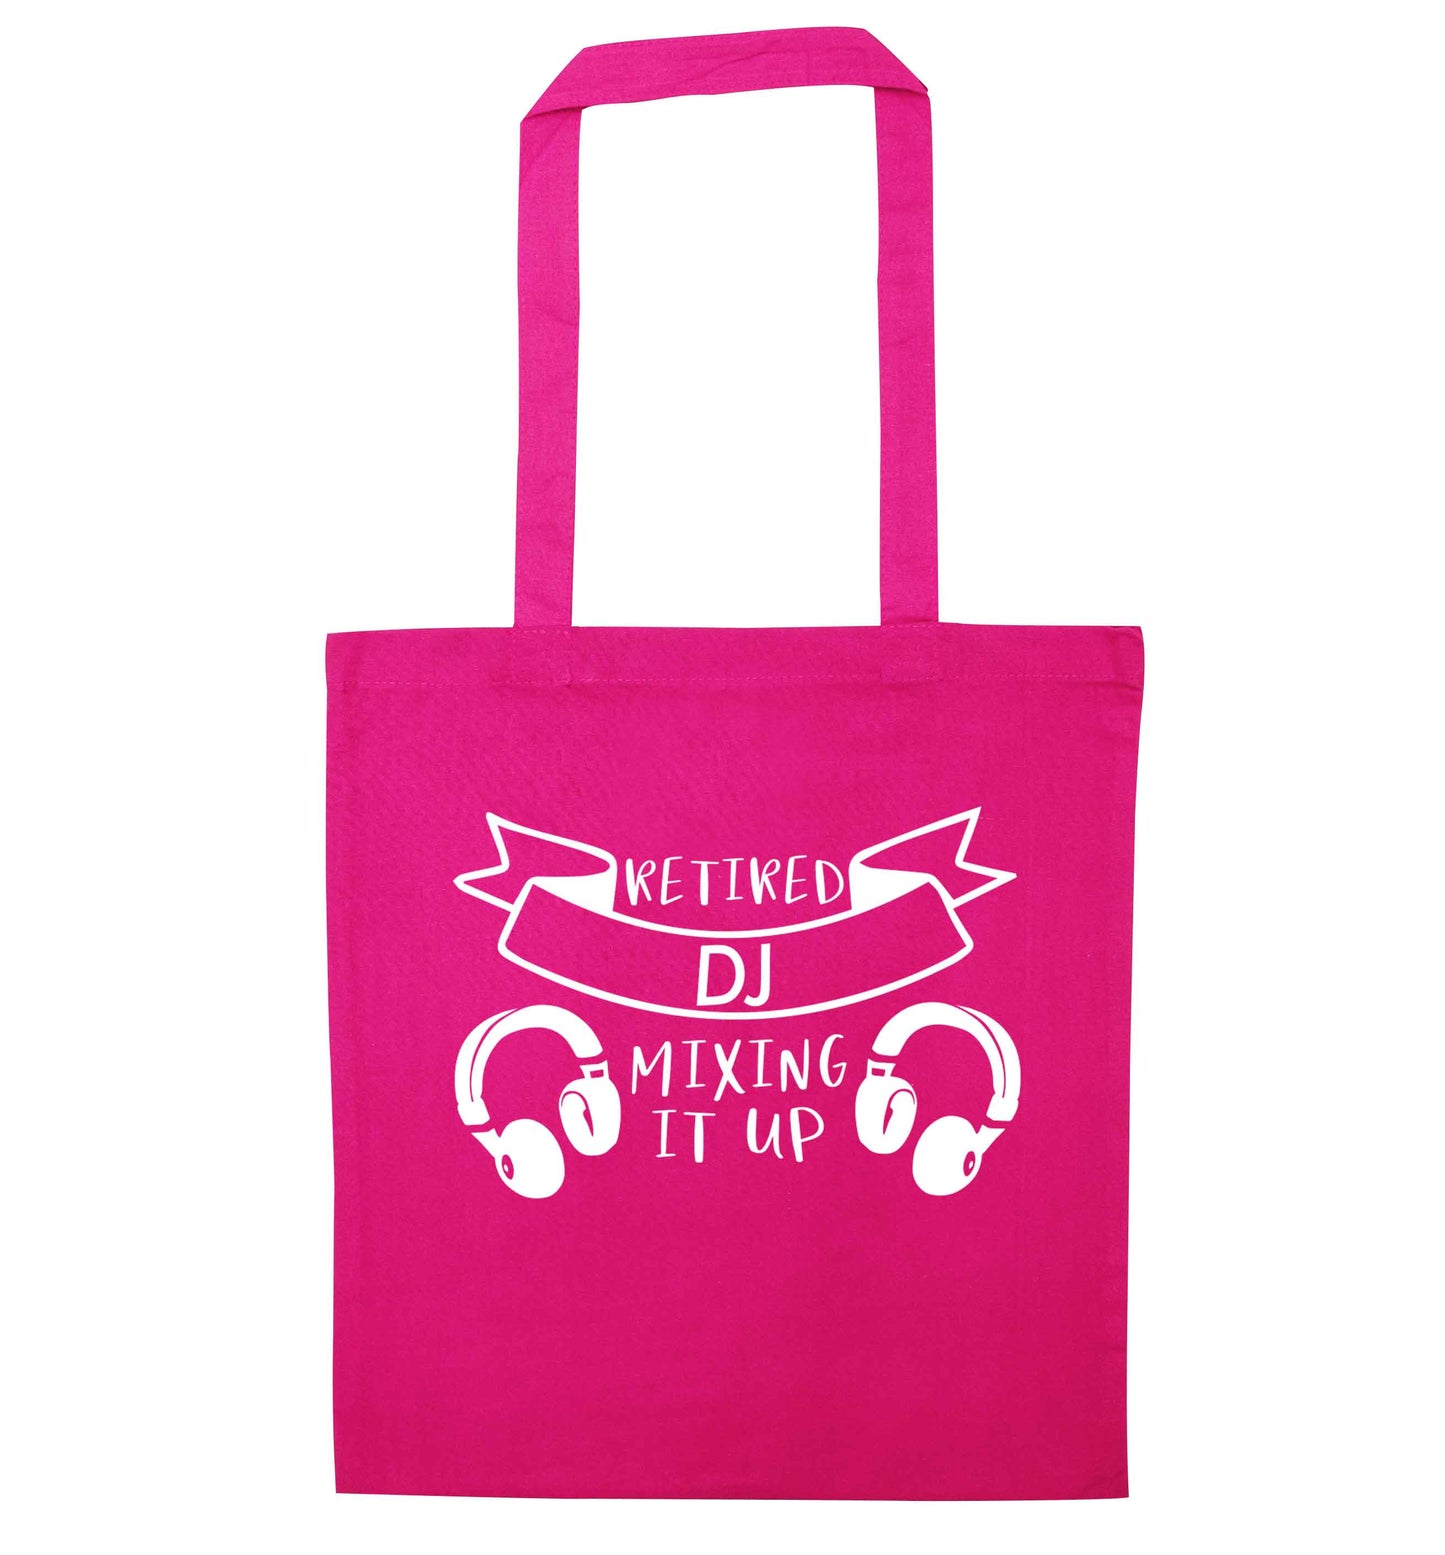 Retired DJ mixing it up pink tote bag